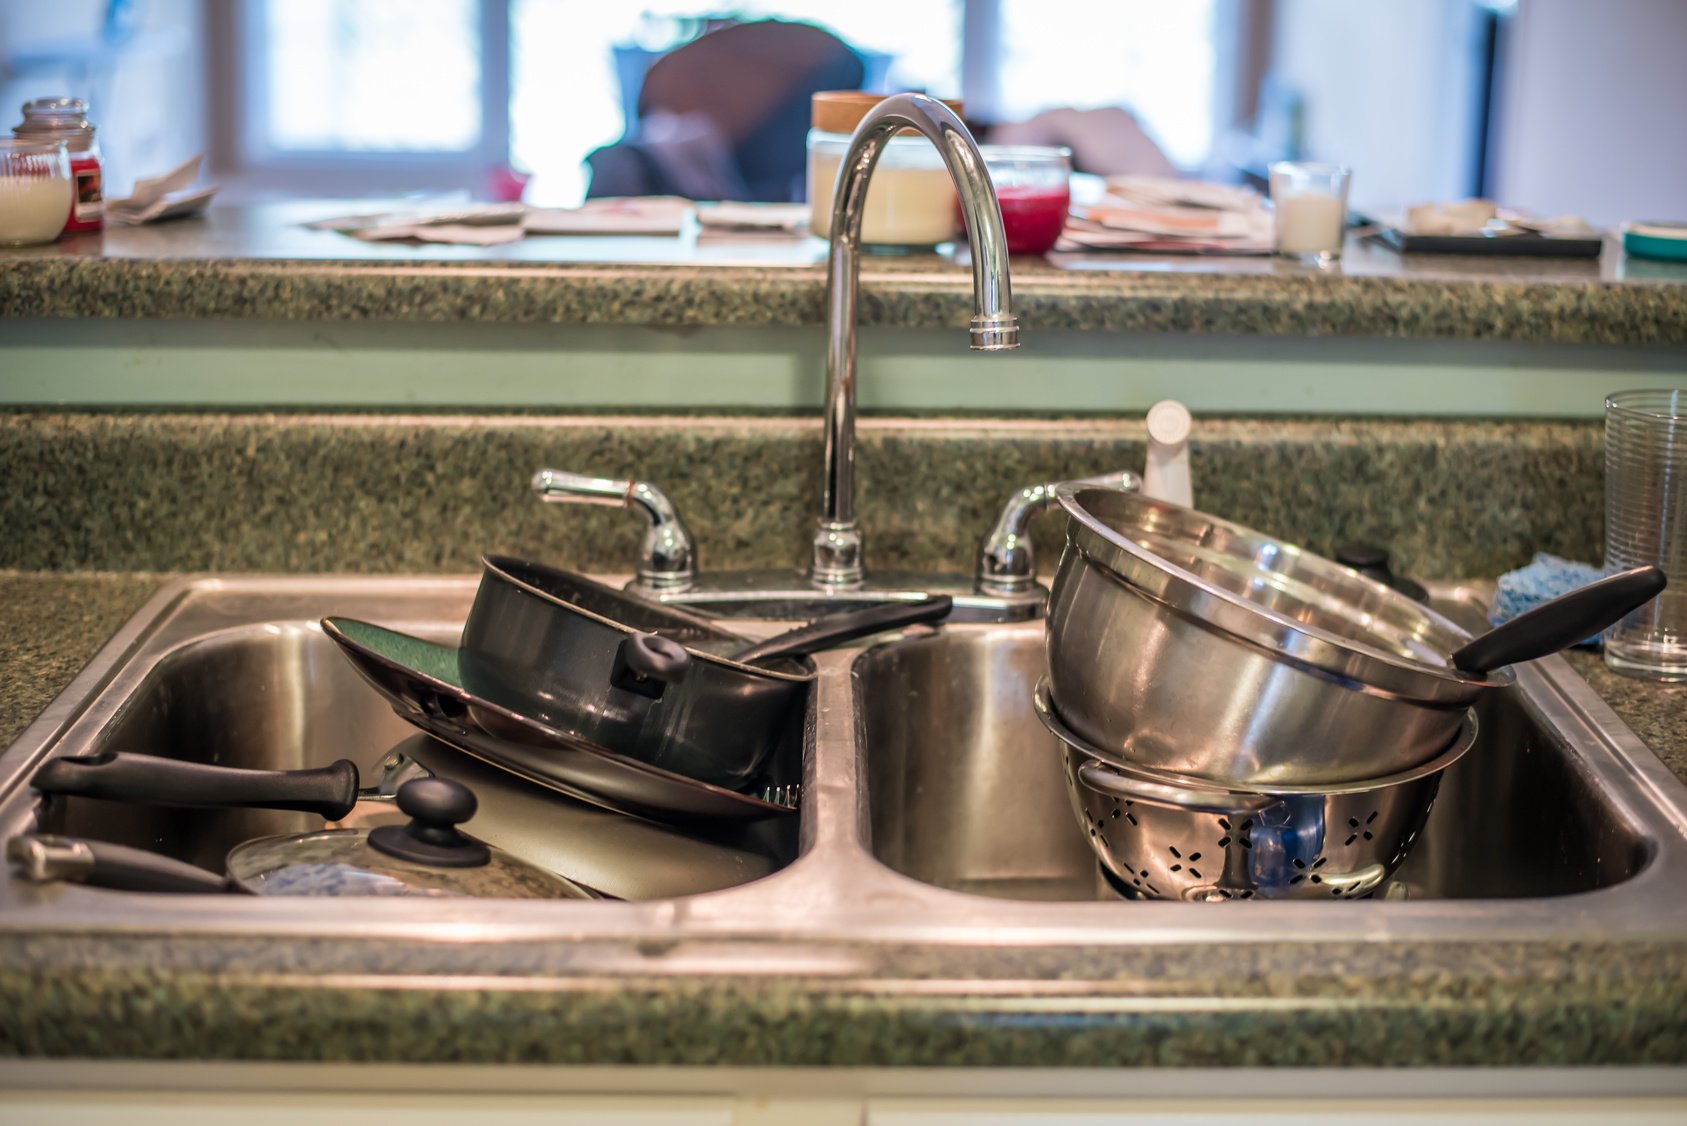 Sink of Dirty Dishes